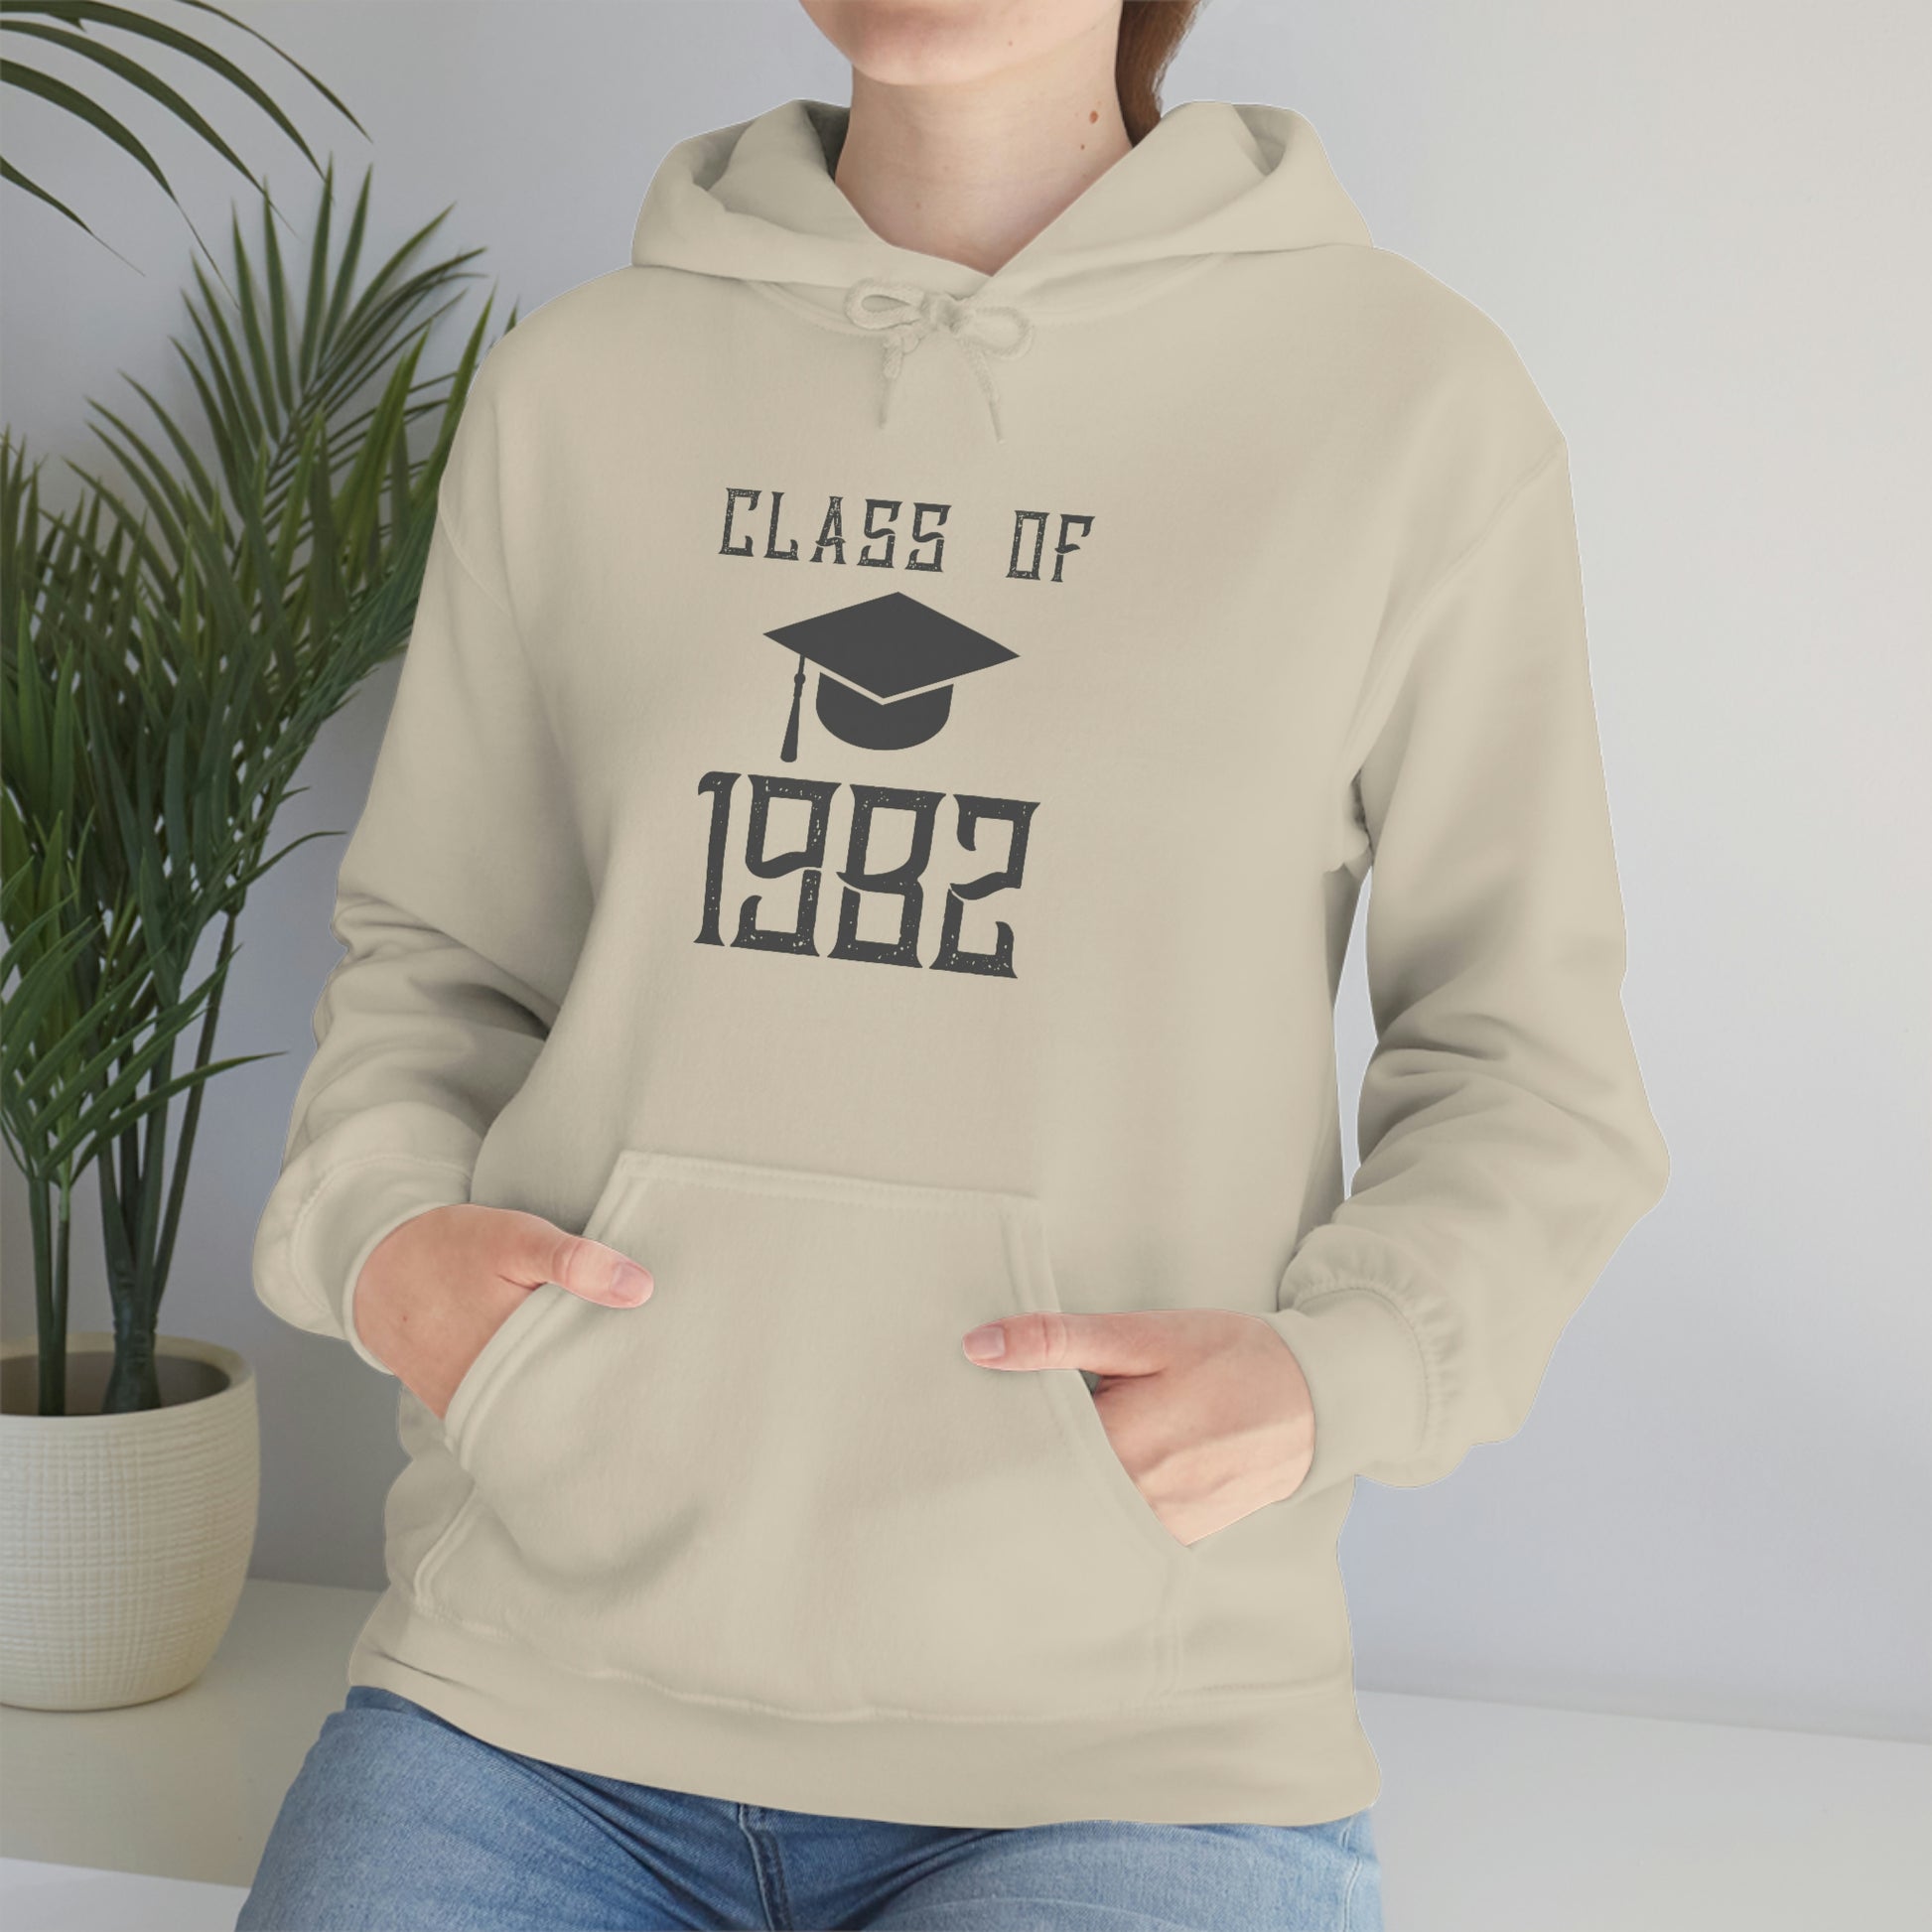 "Class Of 1982" Hoodie - Weave Got Gifts - Unique Gifts You Won’t Find Anywhere Else!